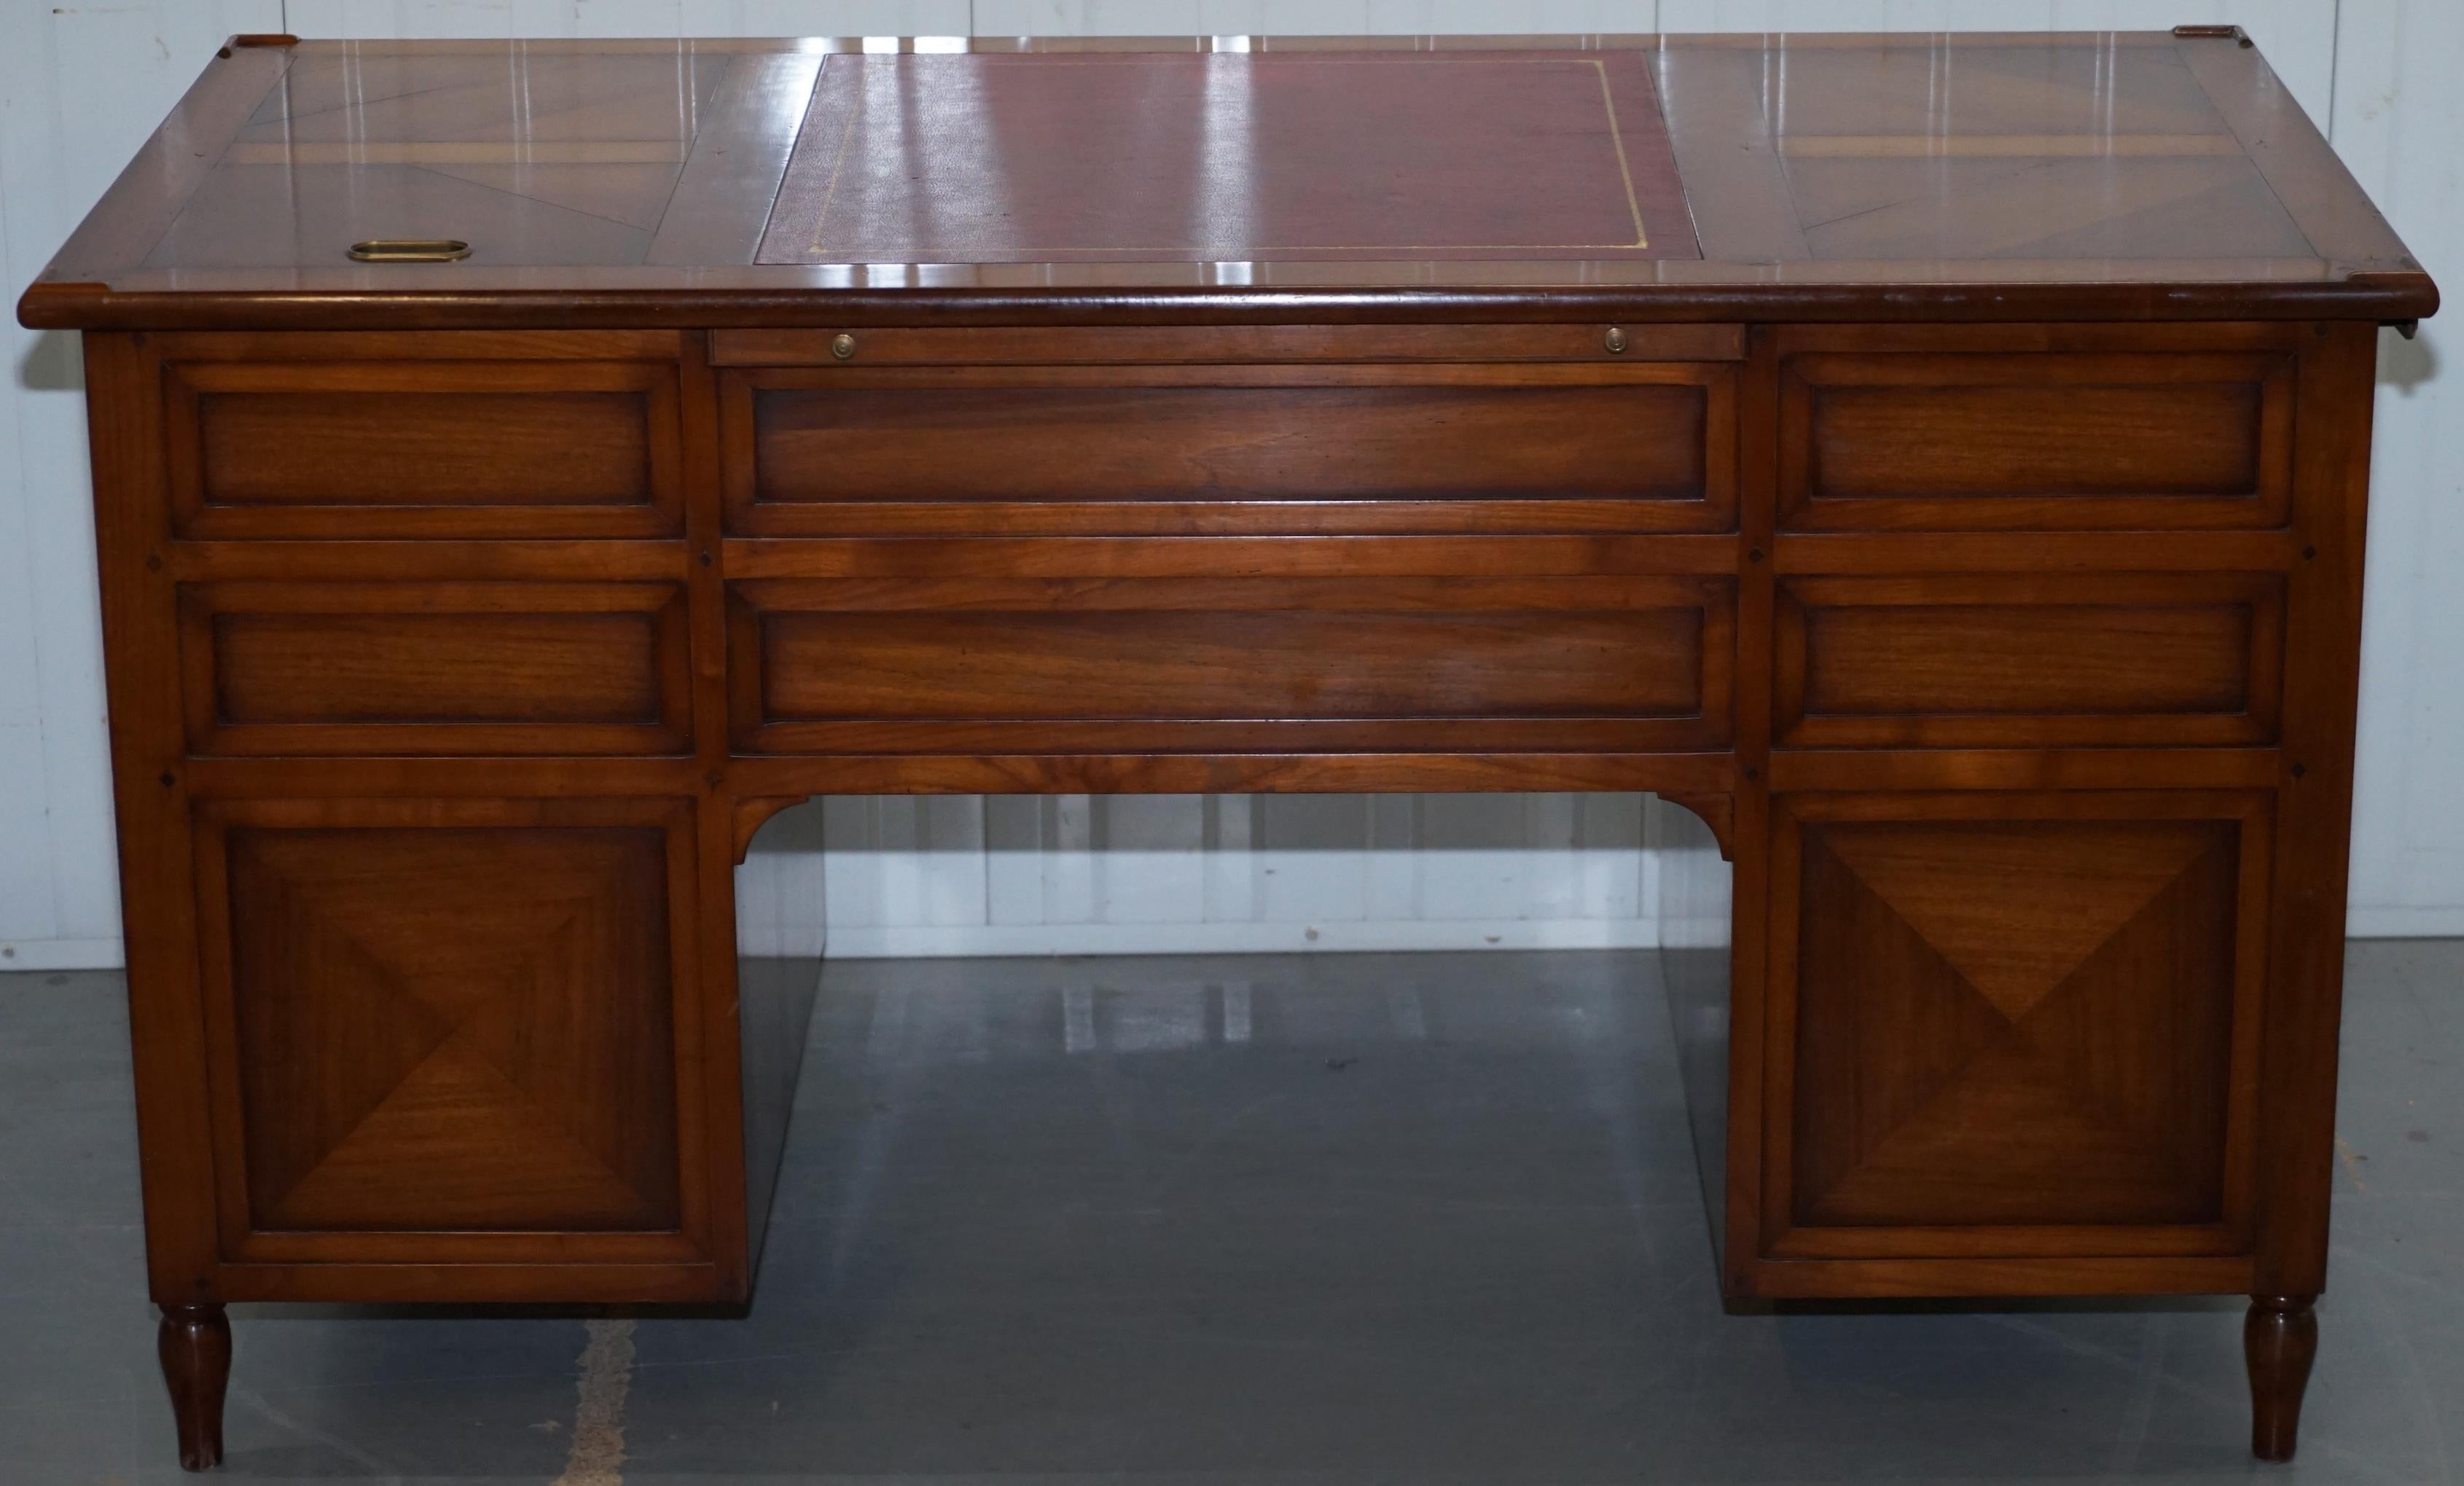 ASSI D'ASOLO ITALY CHERRY WOOD LEATHER DESK DESIGNED To HOUSE COMPUTER 1